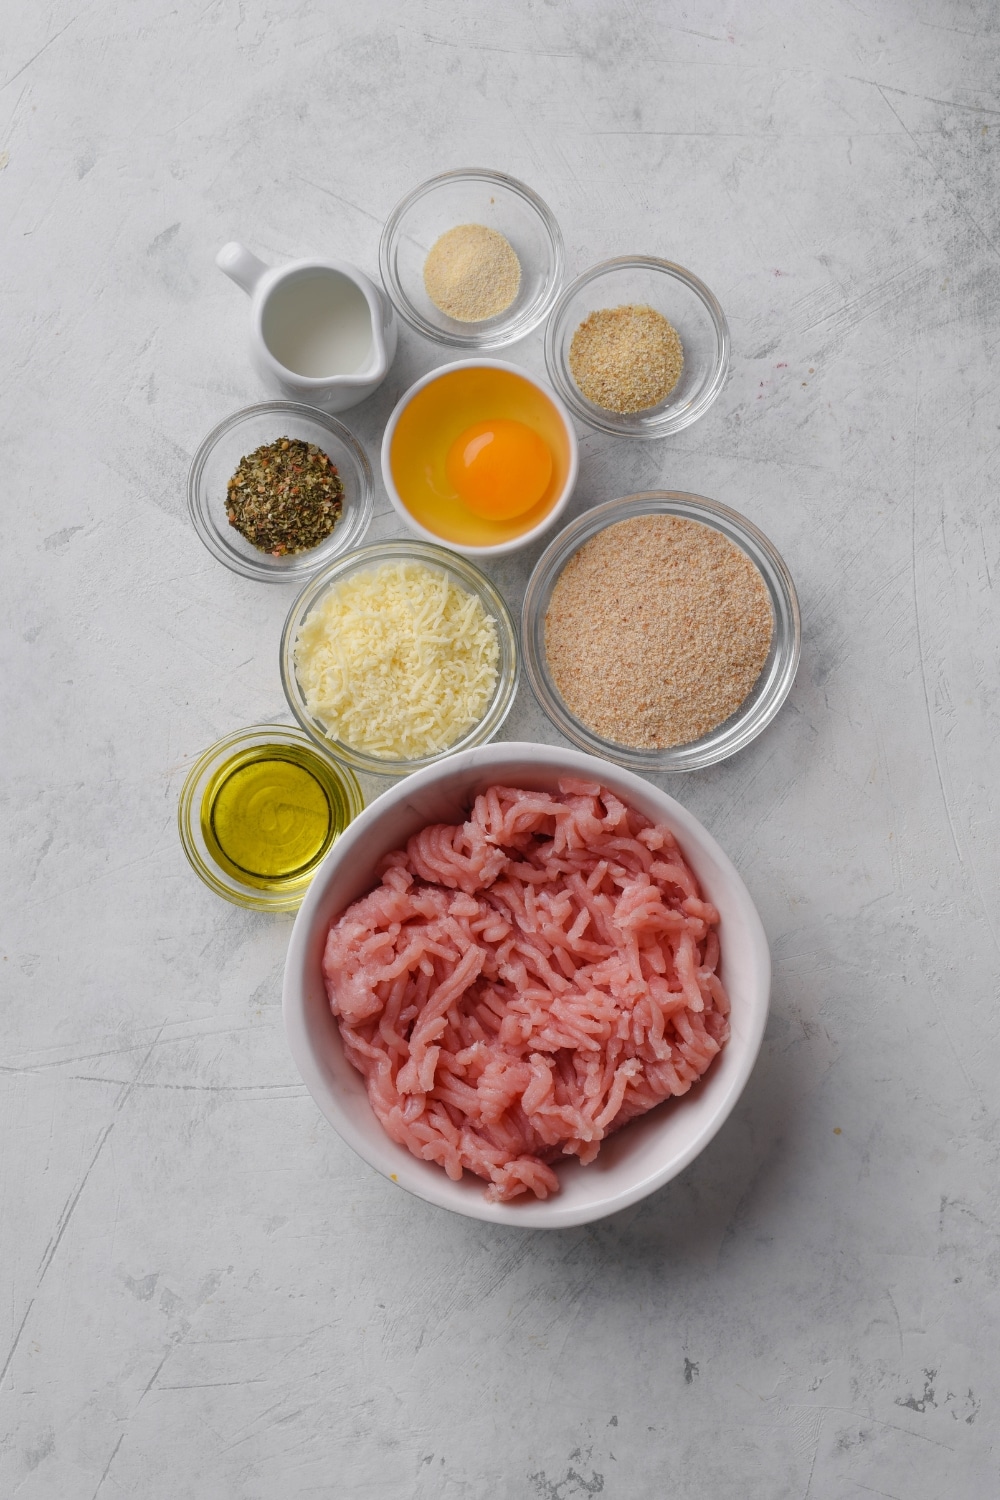 An assortment of ingredients including bowls of raw ground turkey, parmesan cheese, an egg, bread crumbs, oil, and seasonings.